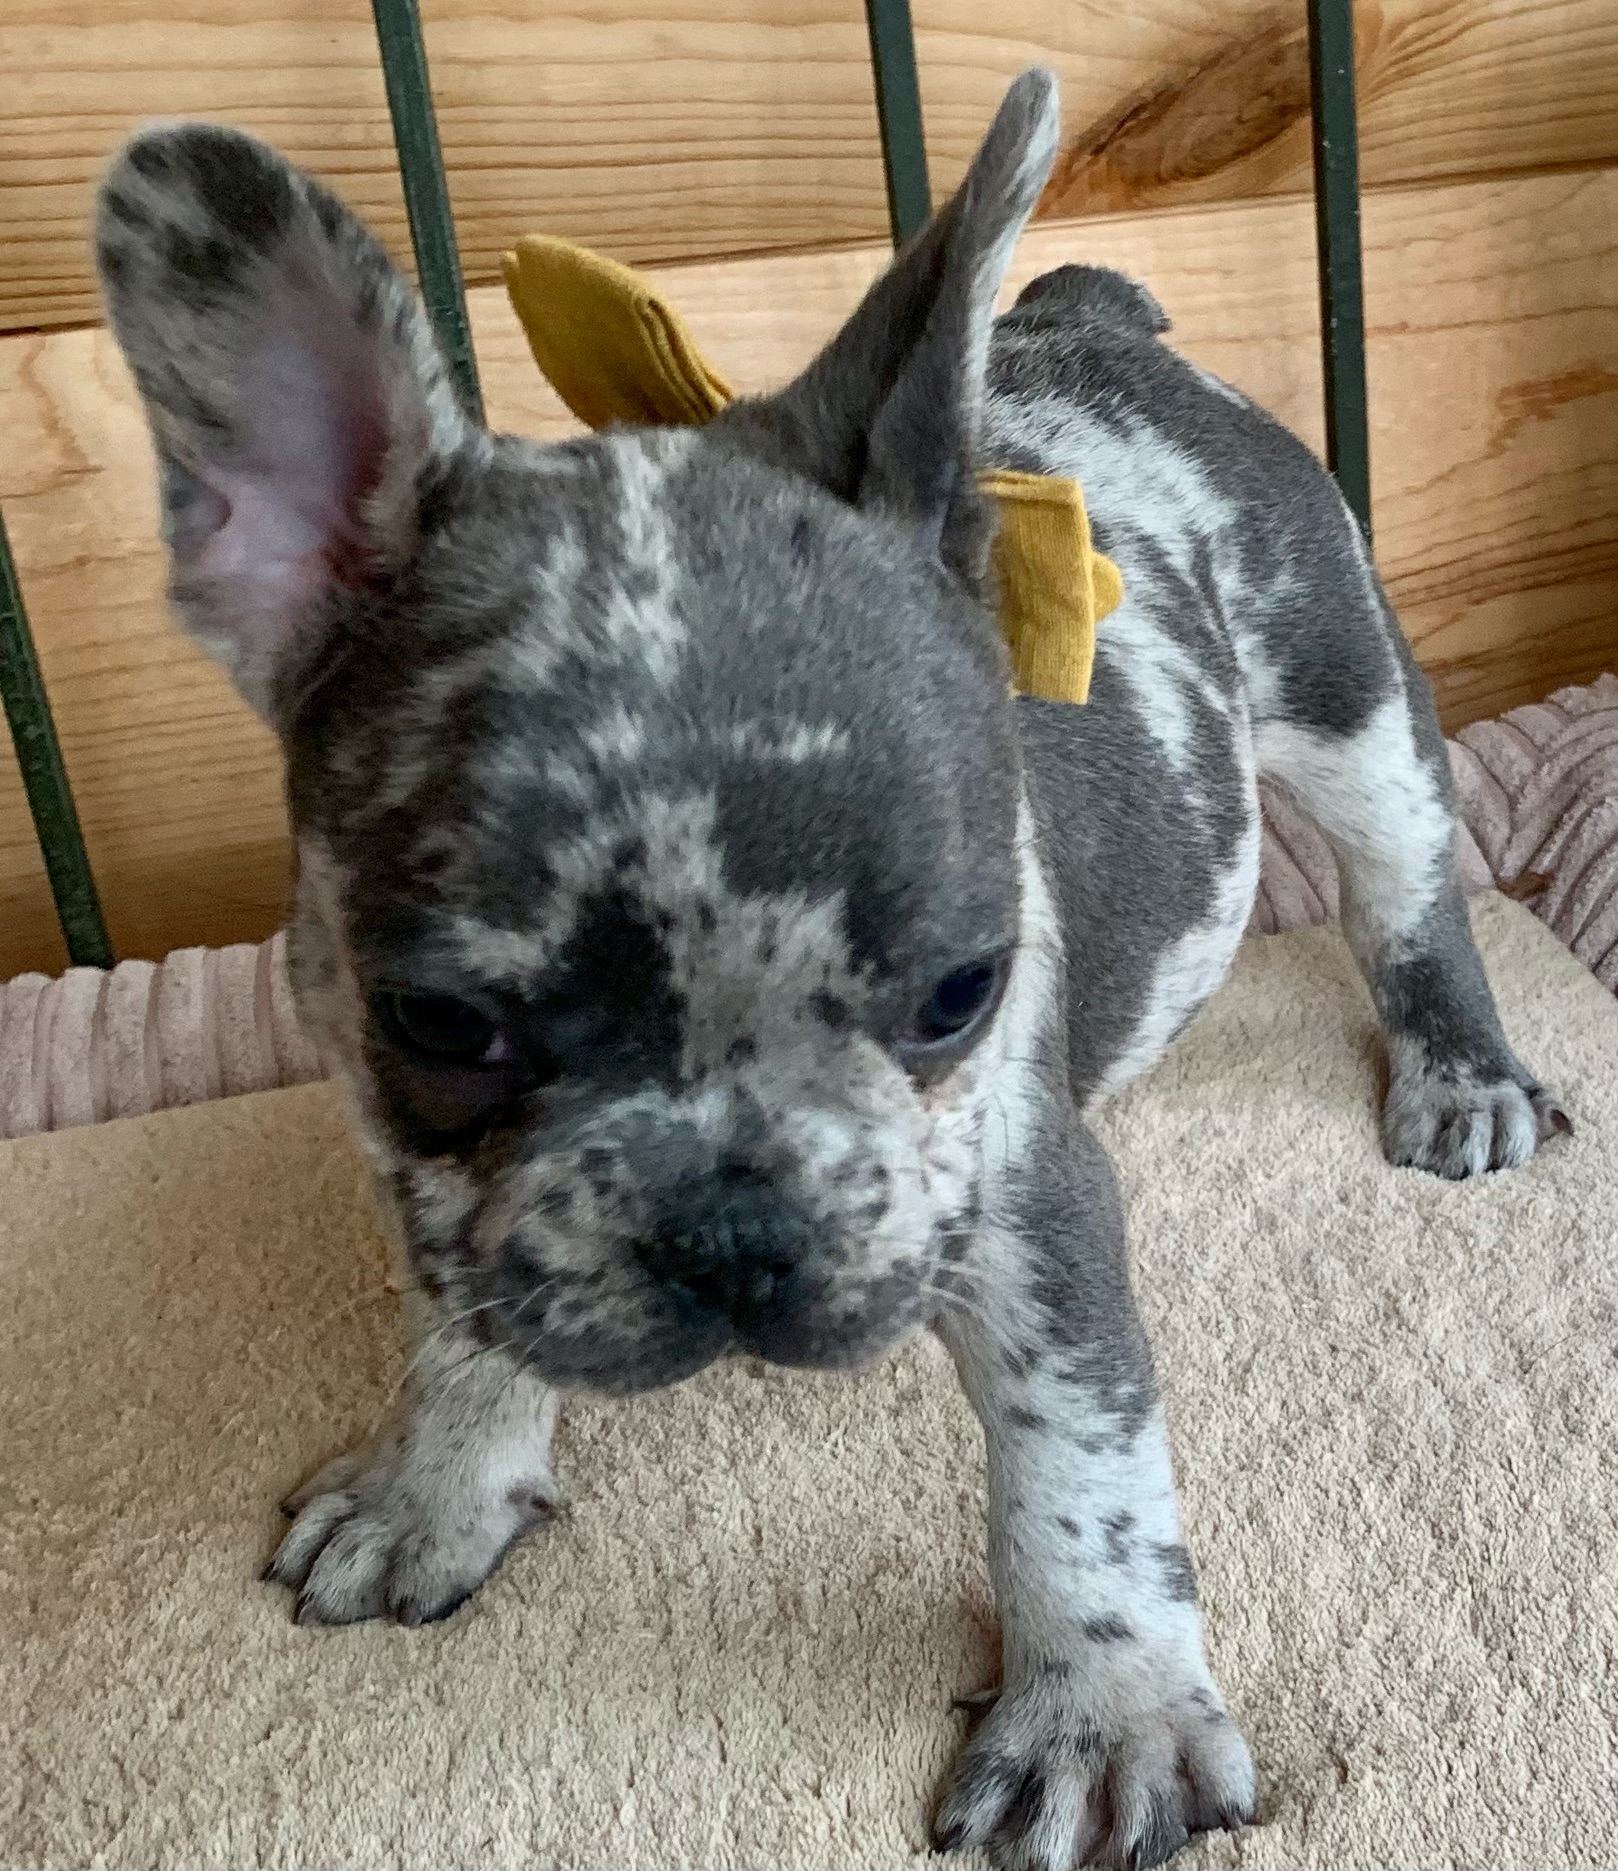 Merle Male French Bulldog: Voodoo- 6755-SOLD - The French Bulldog